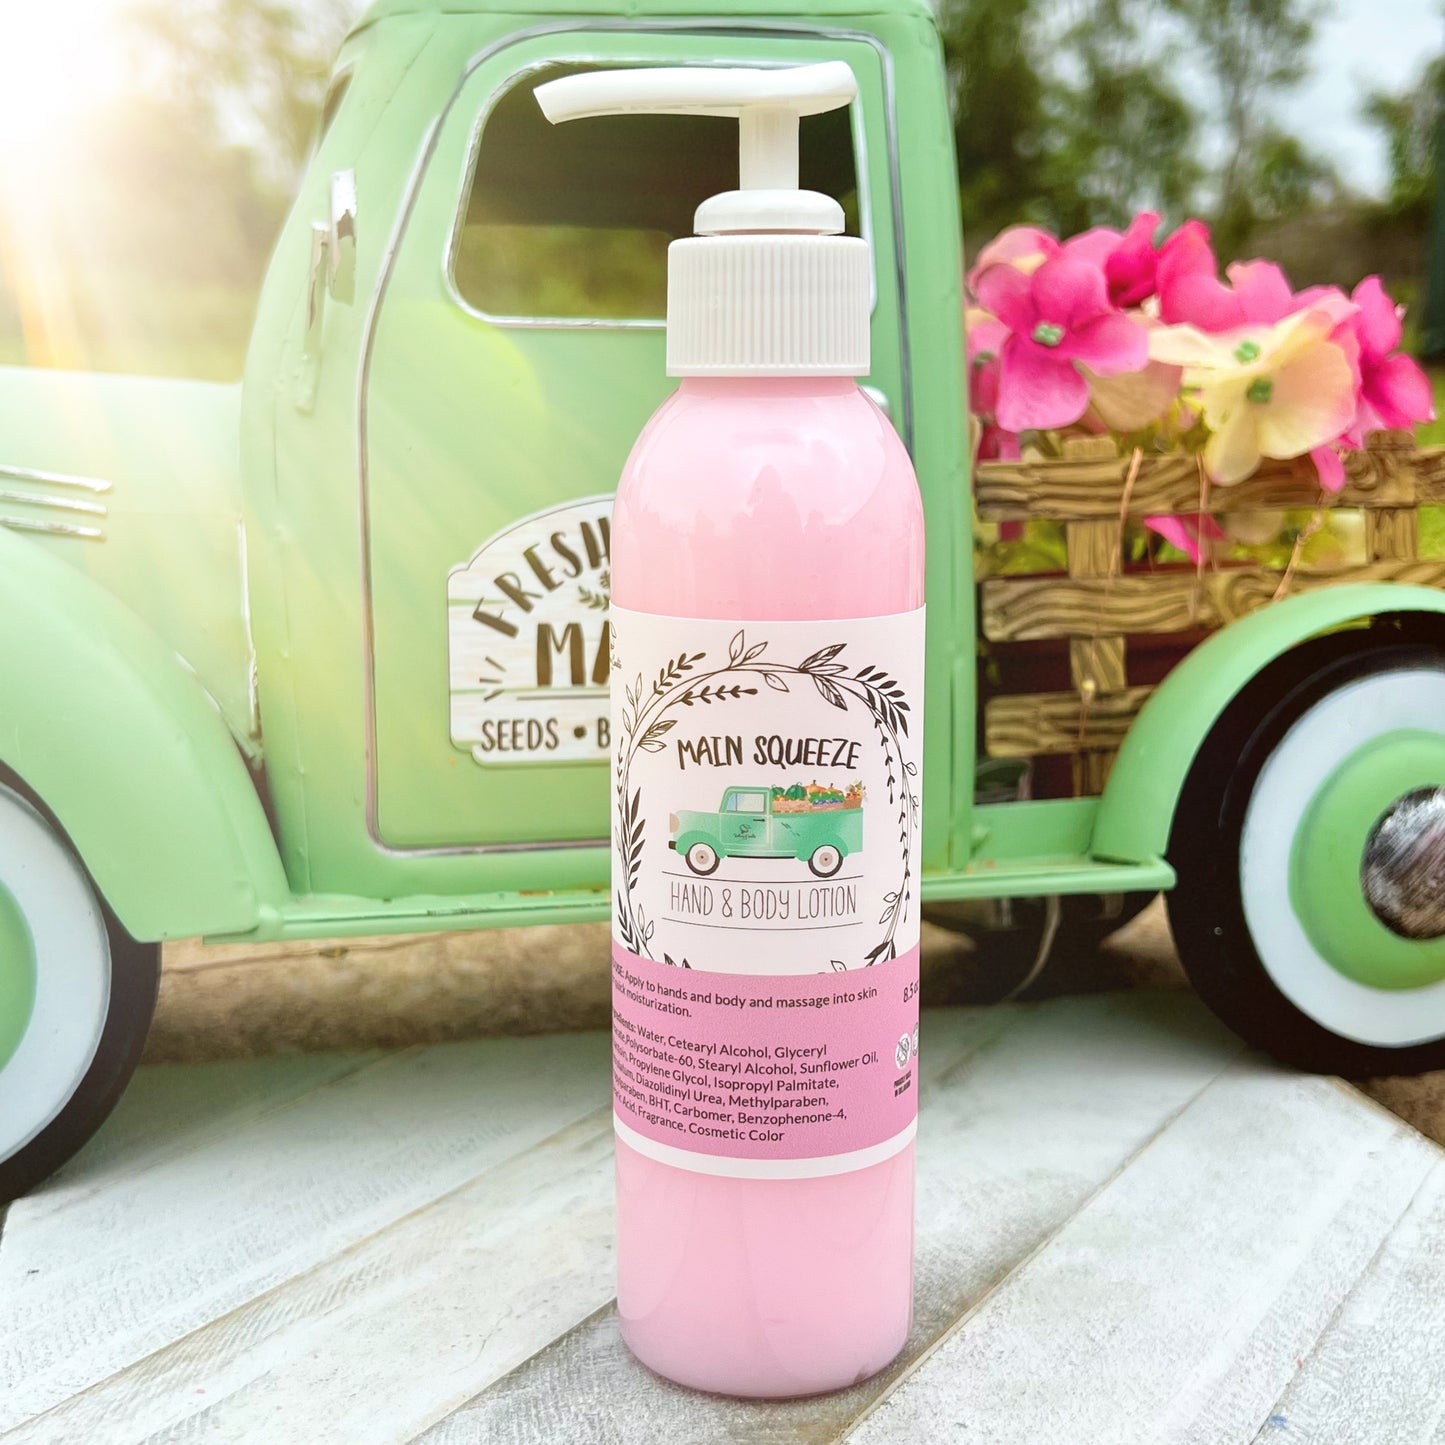 MAIN SQUEEZE Hand & Body Lotion